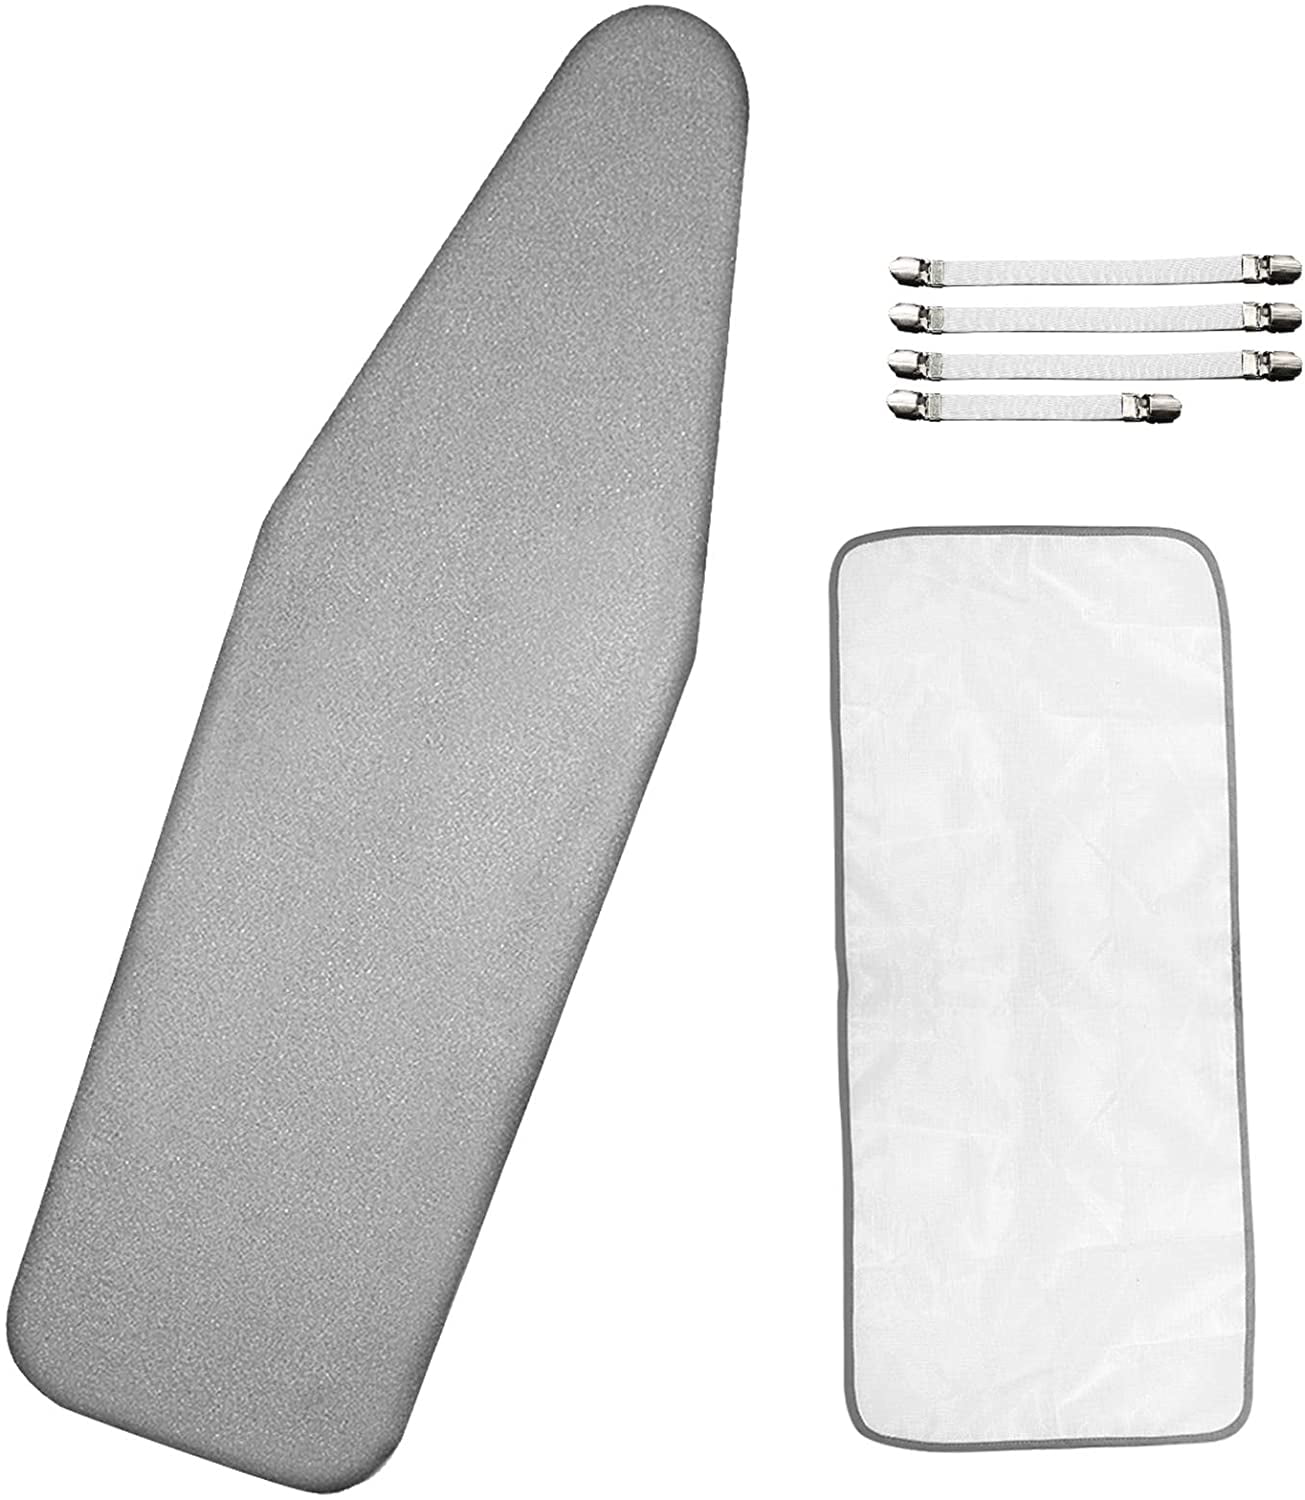 Pack of 4 Clips Ironing Board Cover Clips to Keep Cover Flat on the Board 